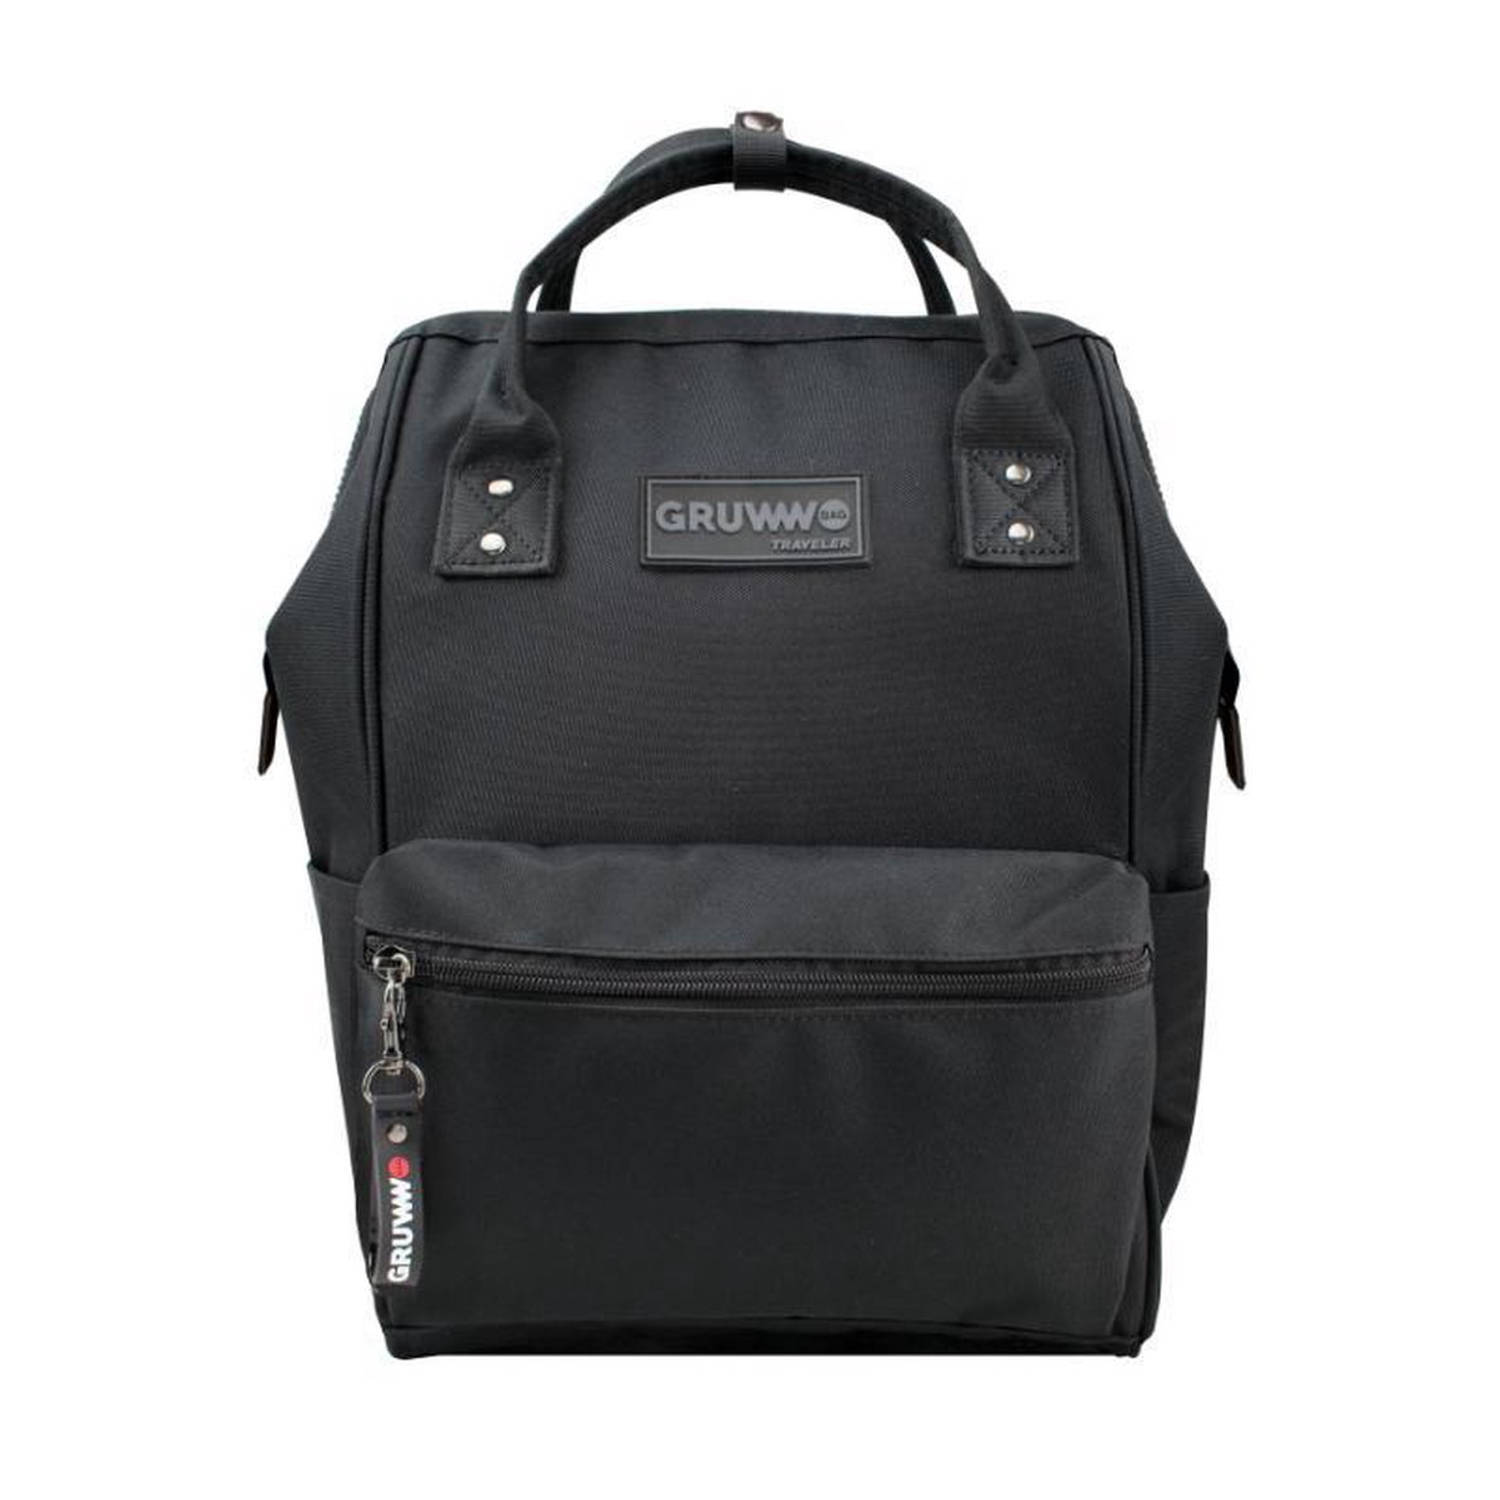 Benza gruww backpack black unique